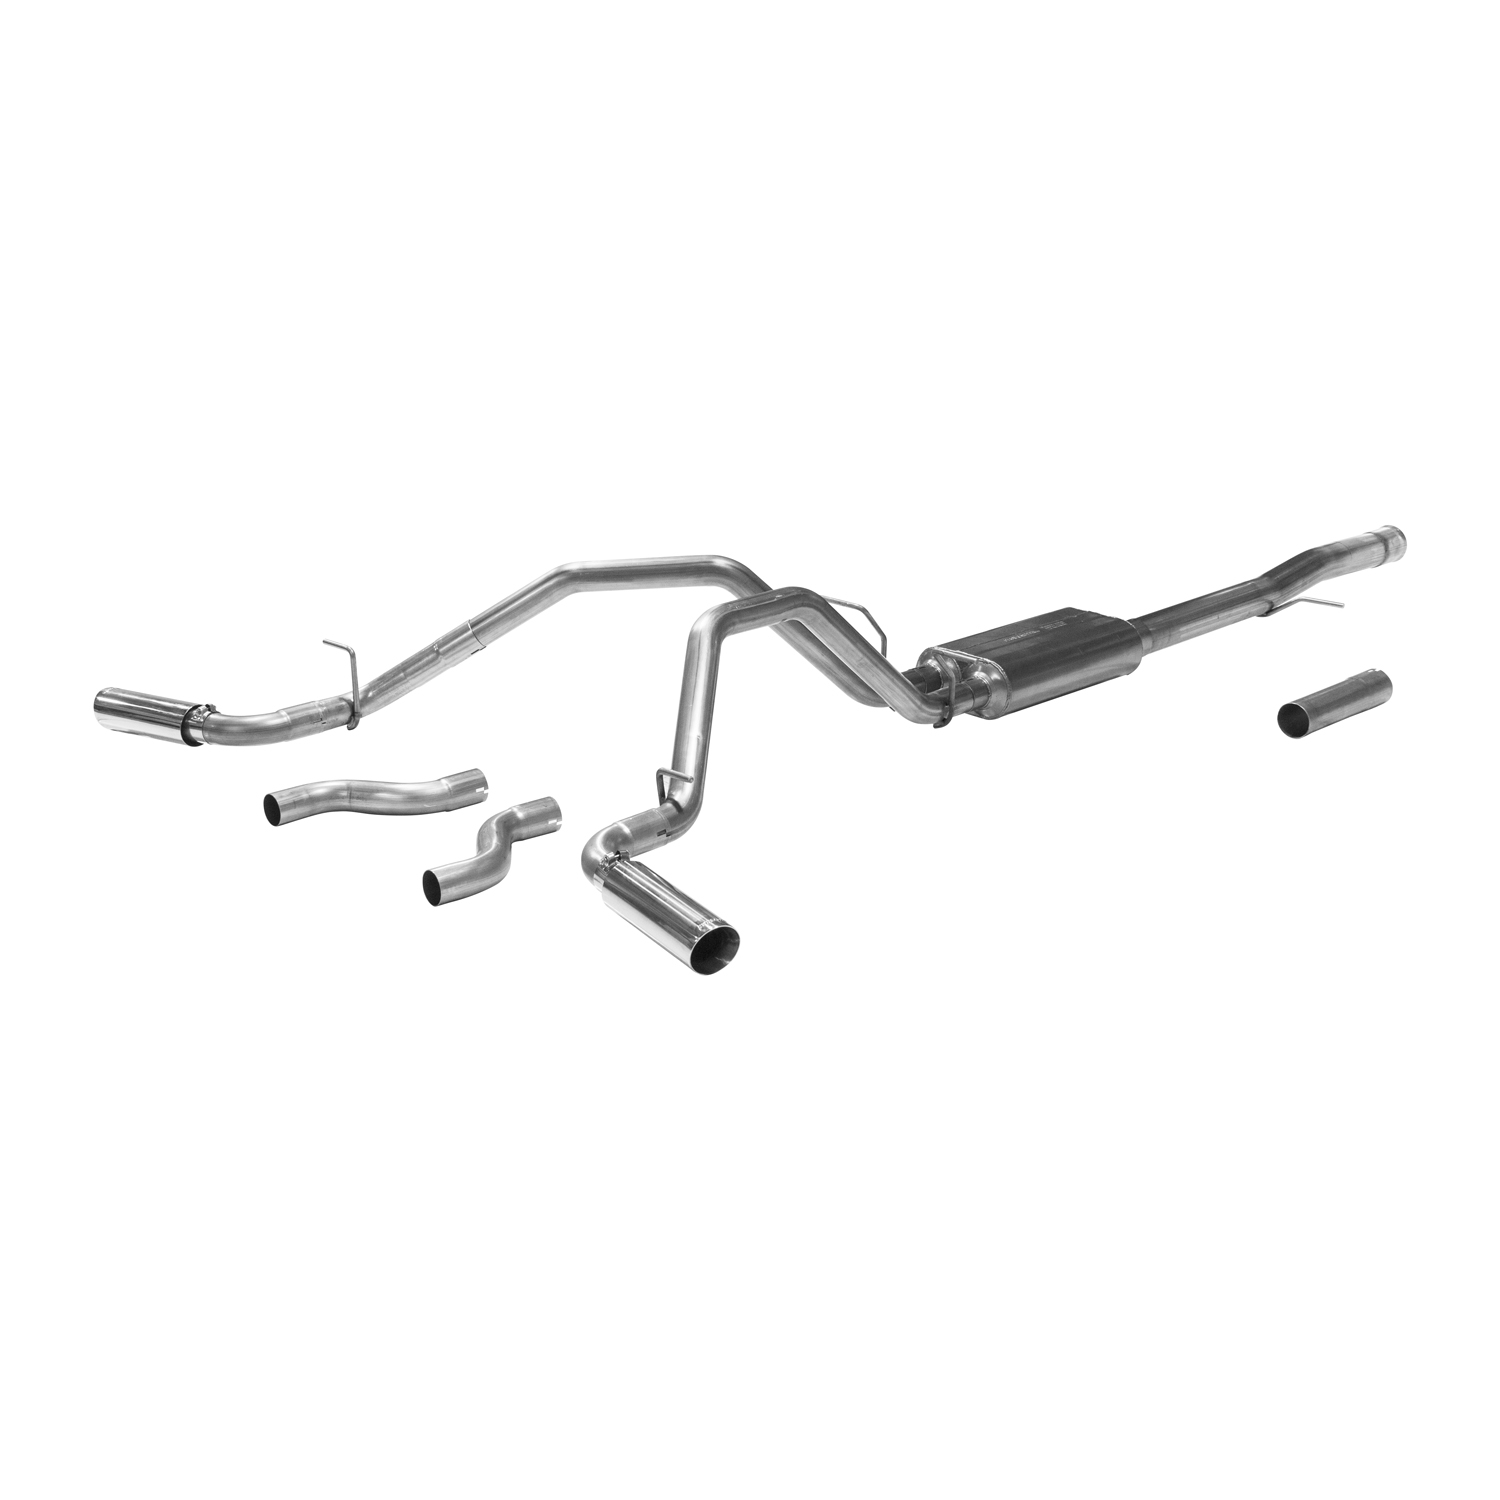 2011+ Chevrolet/GMC 1500 6.2L V8 Flowmaster American Thunder Exhaust System w/Dual Side Exit (Crew Cab and Extended Cab)